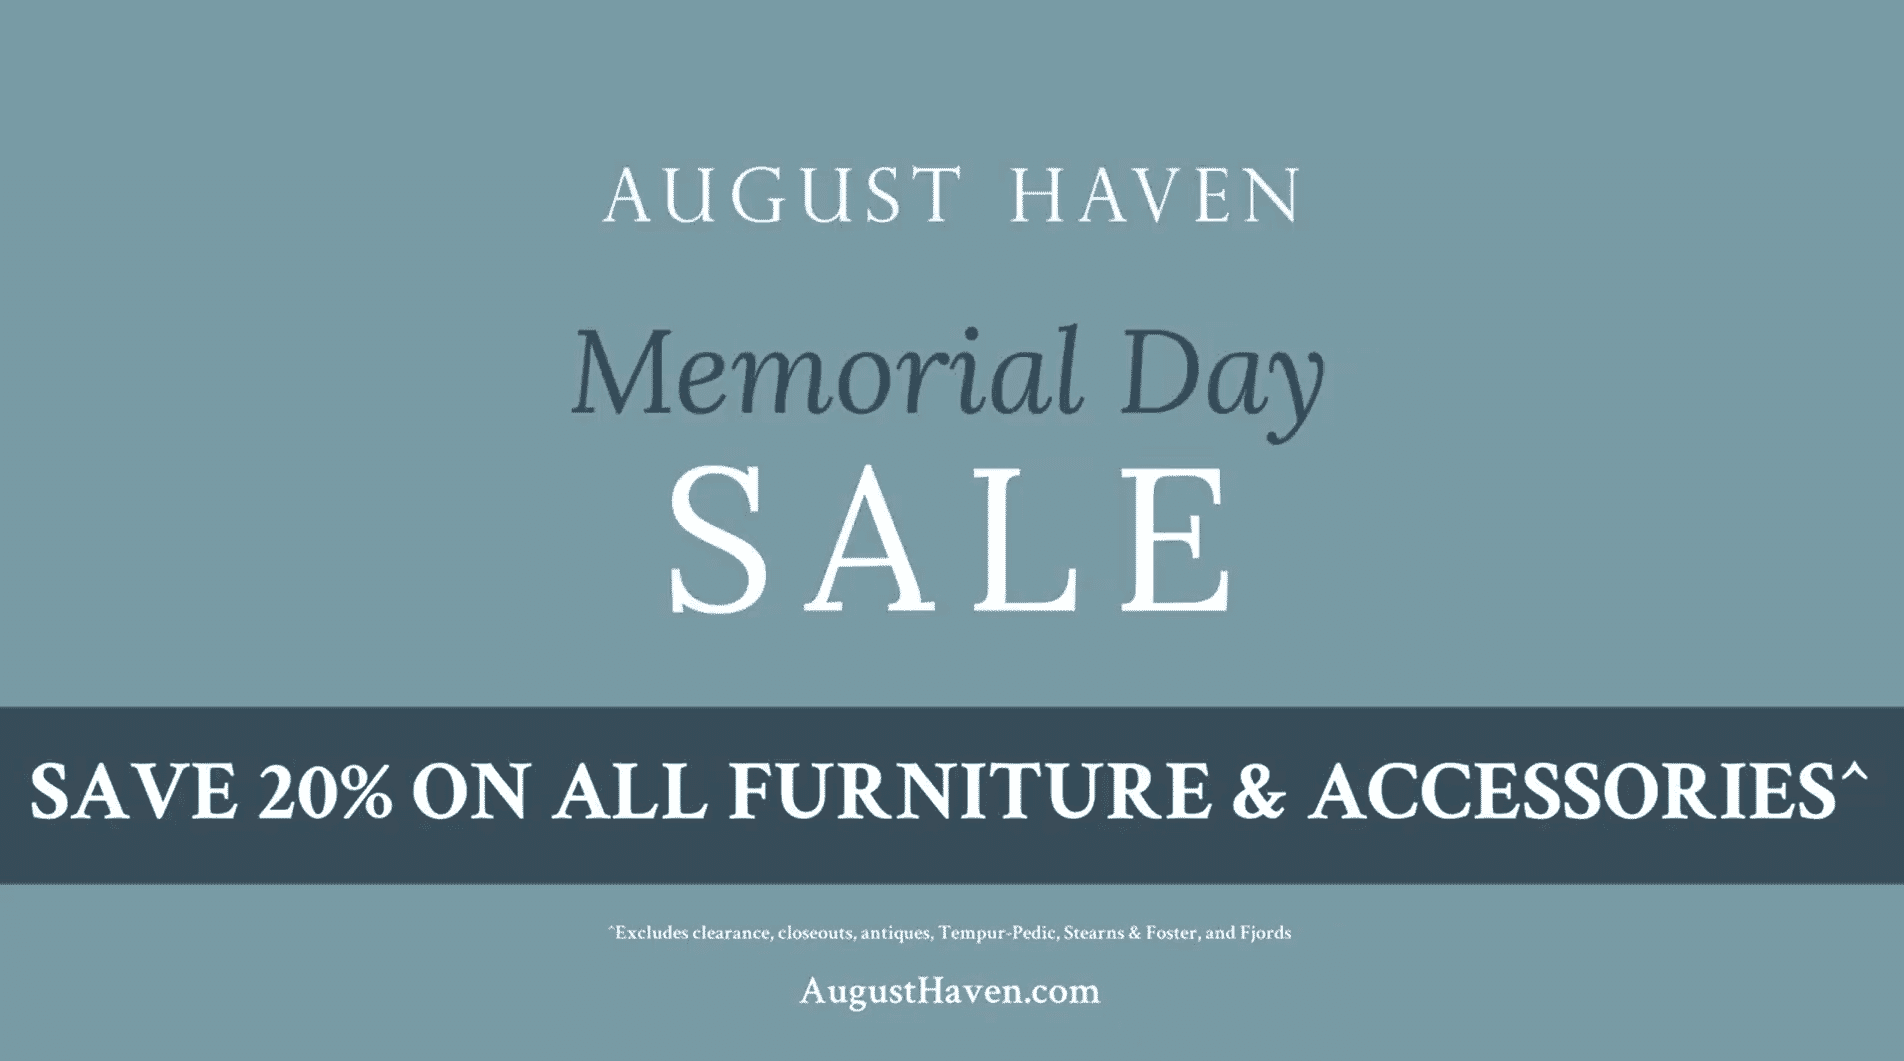 August Haven Memorial Day Furniture Sale